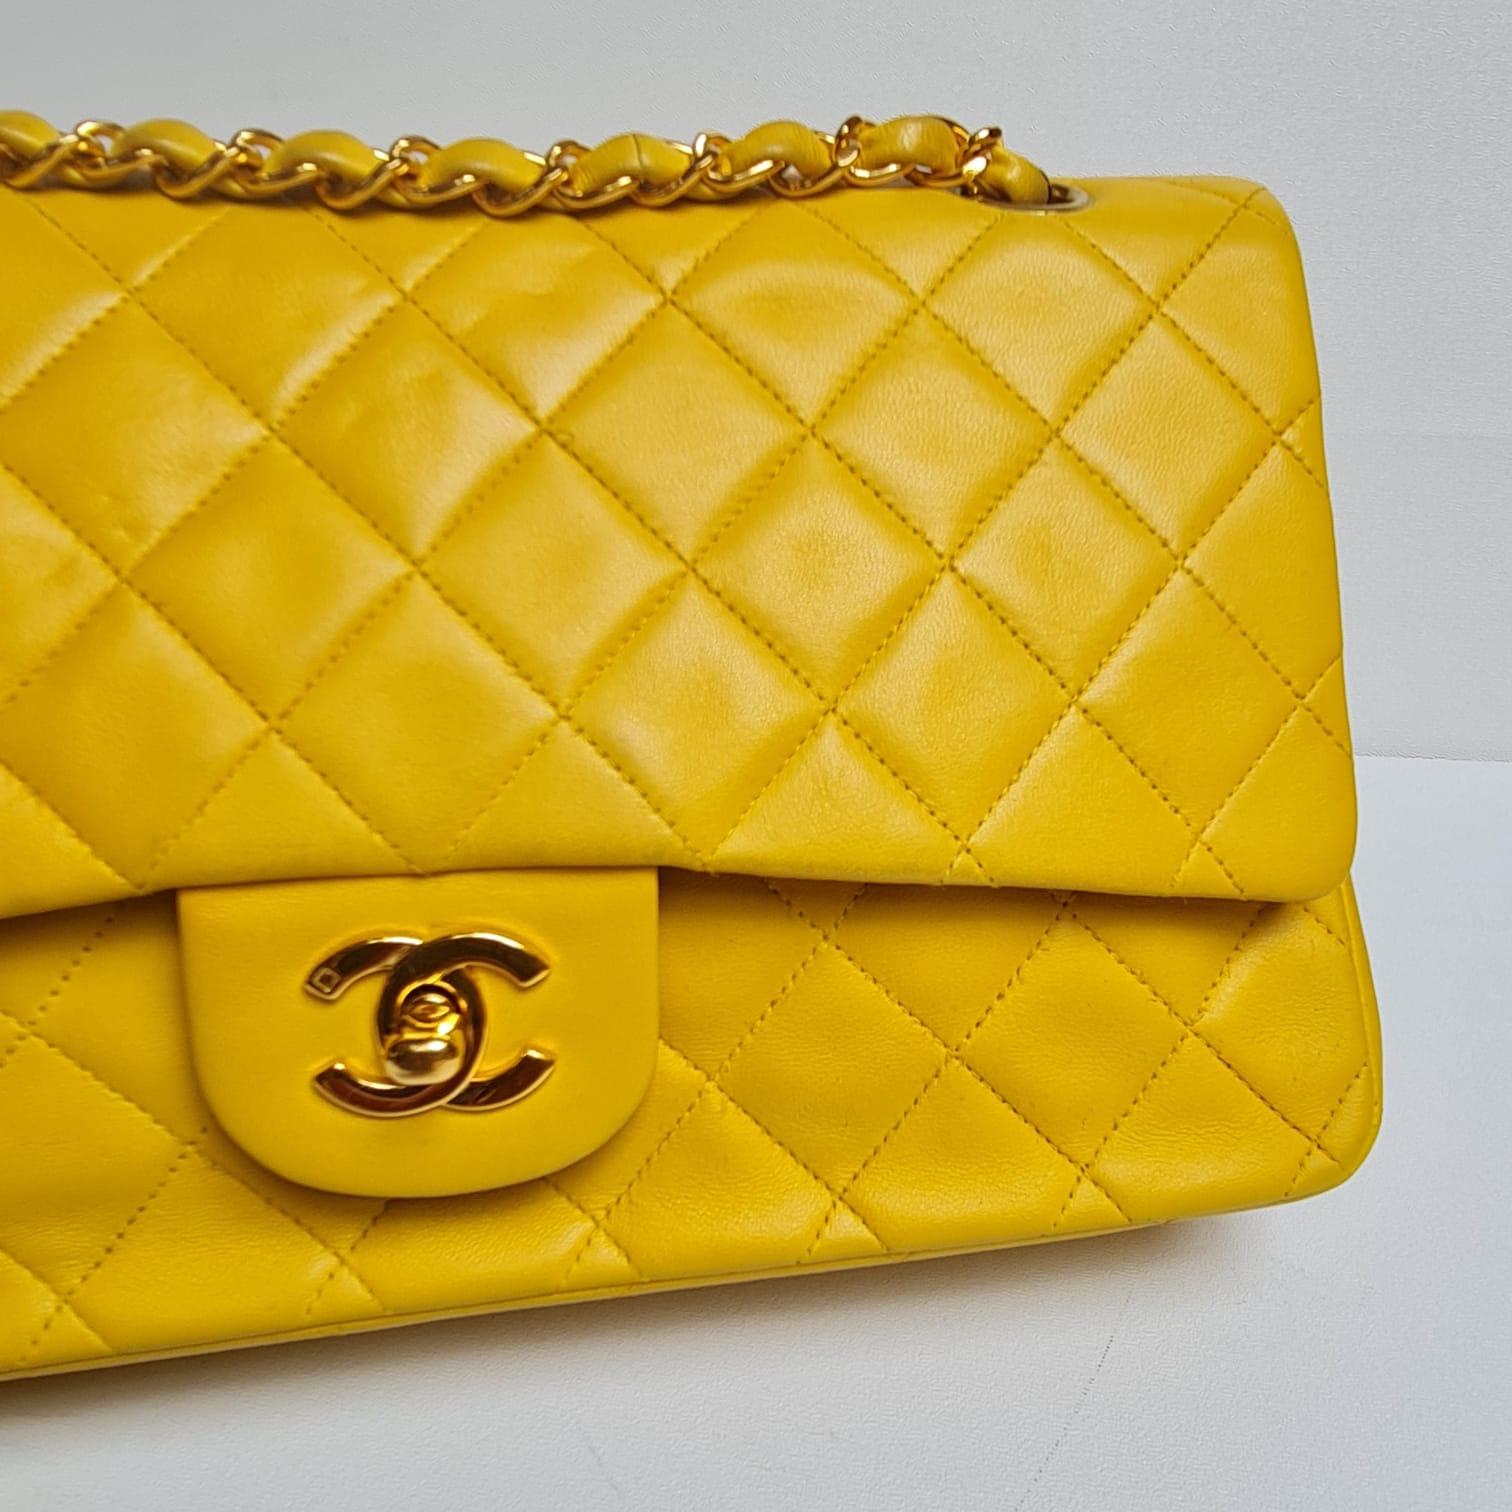 Rare classic lambskin vintage chanel in medium size with gold hardware. Overall in great vintage condition with light dents and marks on the leather surface and corners, but nothing significant. Comes with its holo only. 